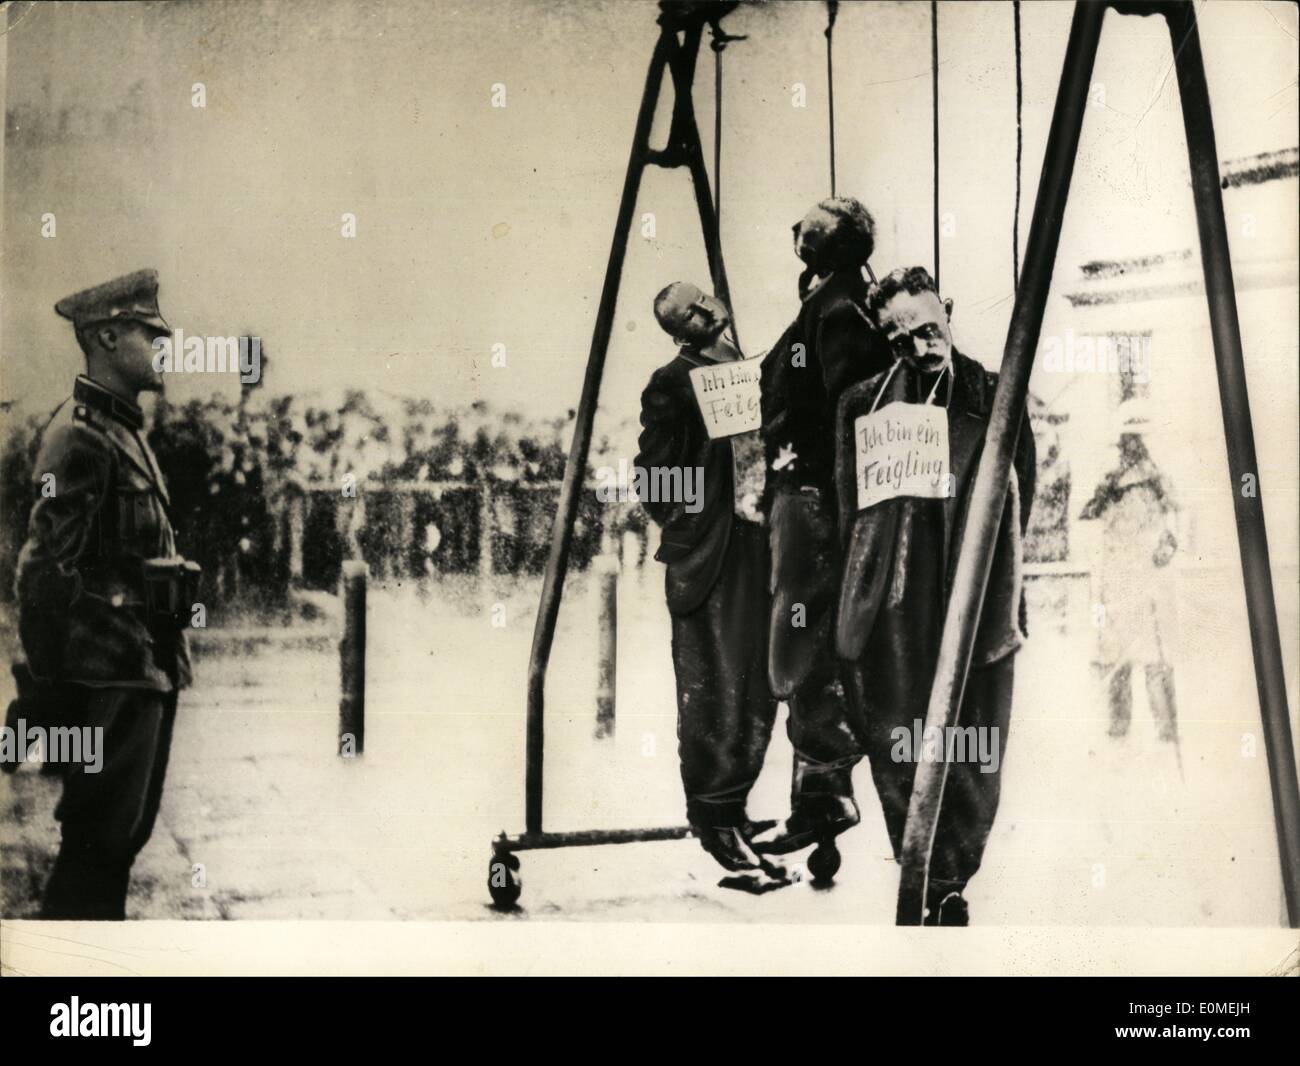 Feb. 02, 1955 - So Soldiers are hanged into the fight : German people are executed, that one of the most unscrupulous Nezi generals, the Ex-fieldmarshal Schorner, set free by the Russians some weeks ago (Keys tone-pictures of Jan.29th), is living   and is jet free. Schorner is accused of war criminals to soldiers being under him. Photo shows At the Eastern front 1944 some soldiers are hanged. Stock Photo